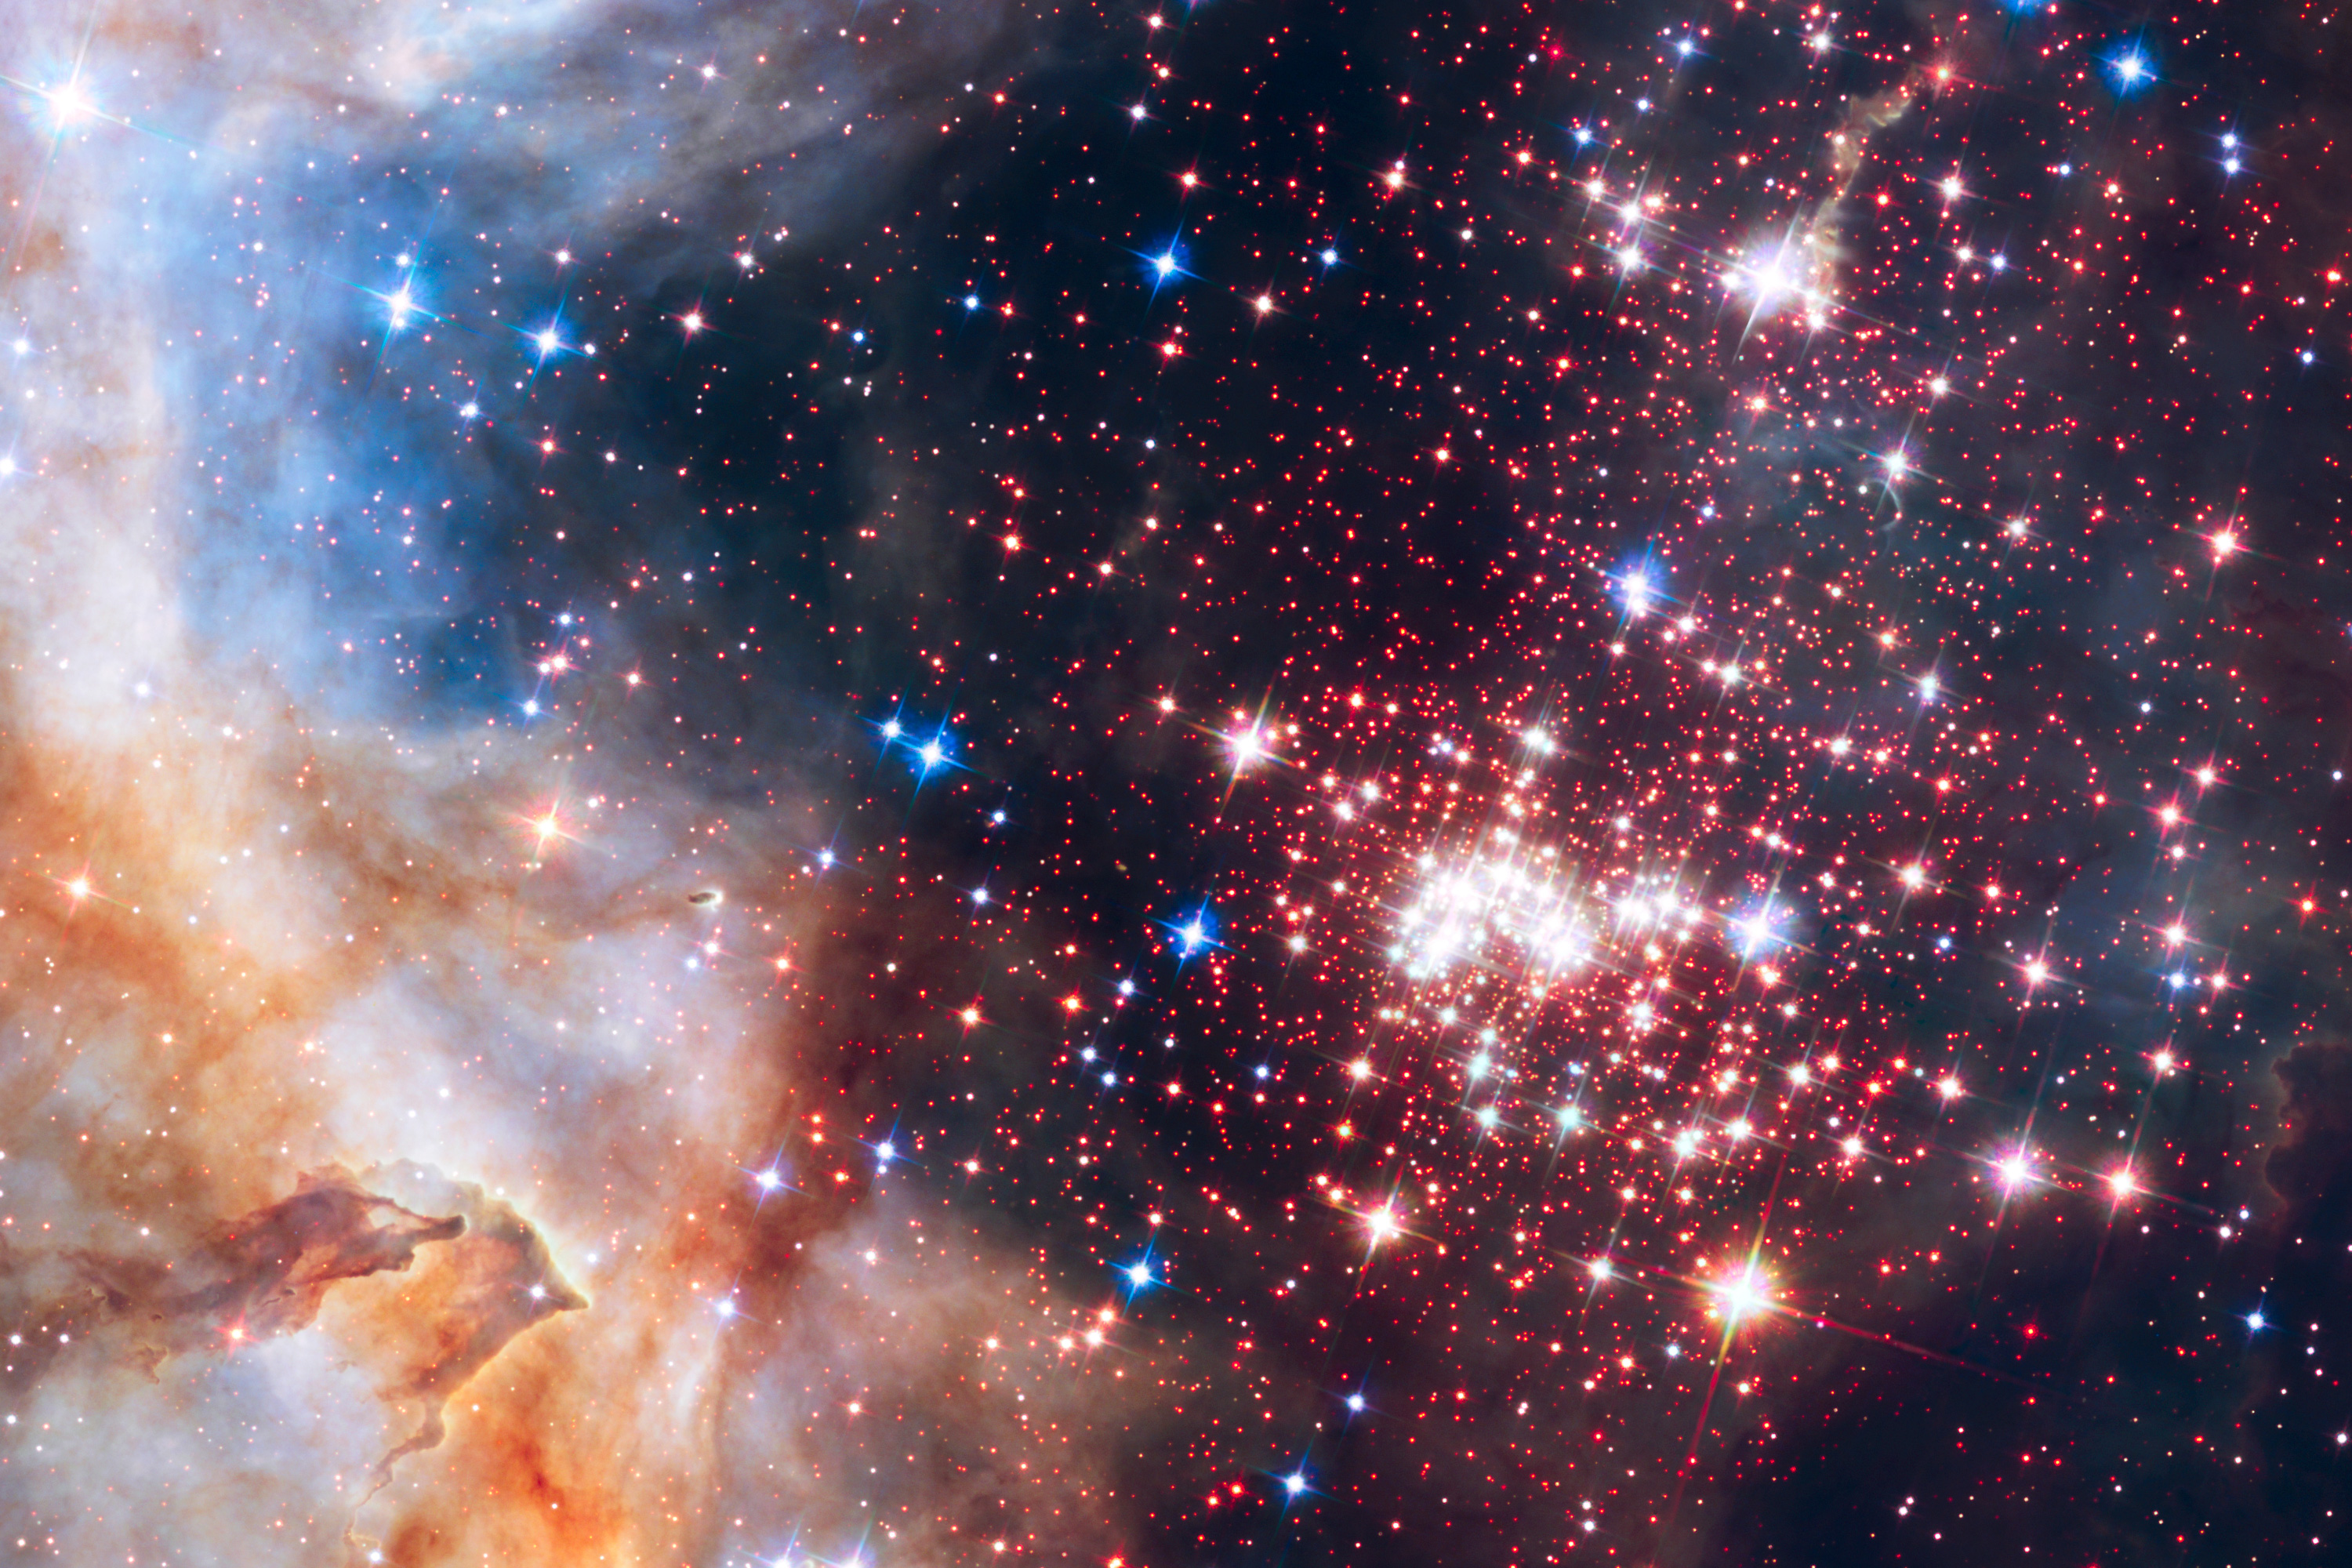 Image Archive: Star Clusters | ESA/Hubble